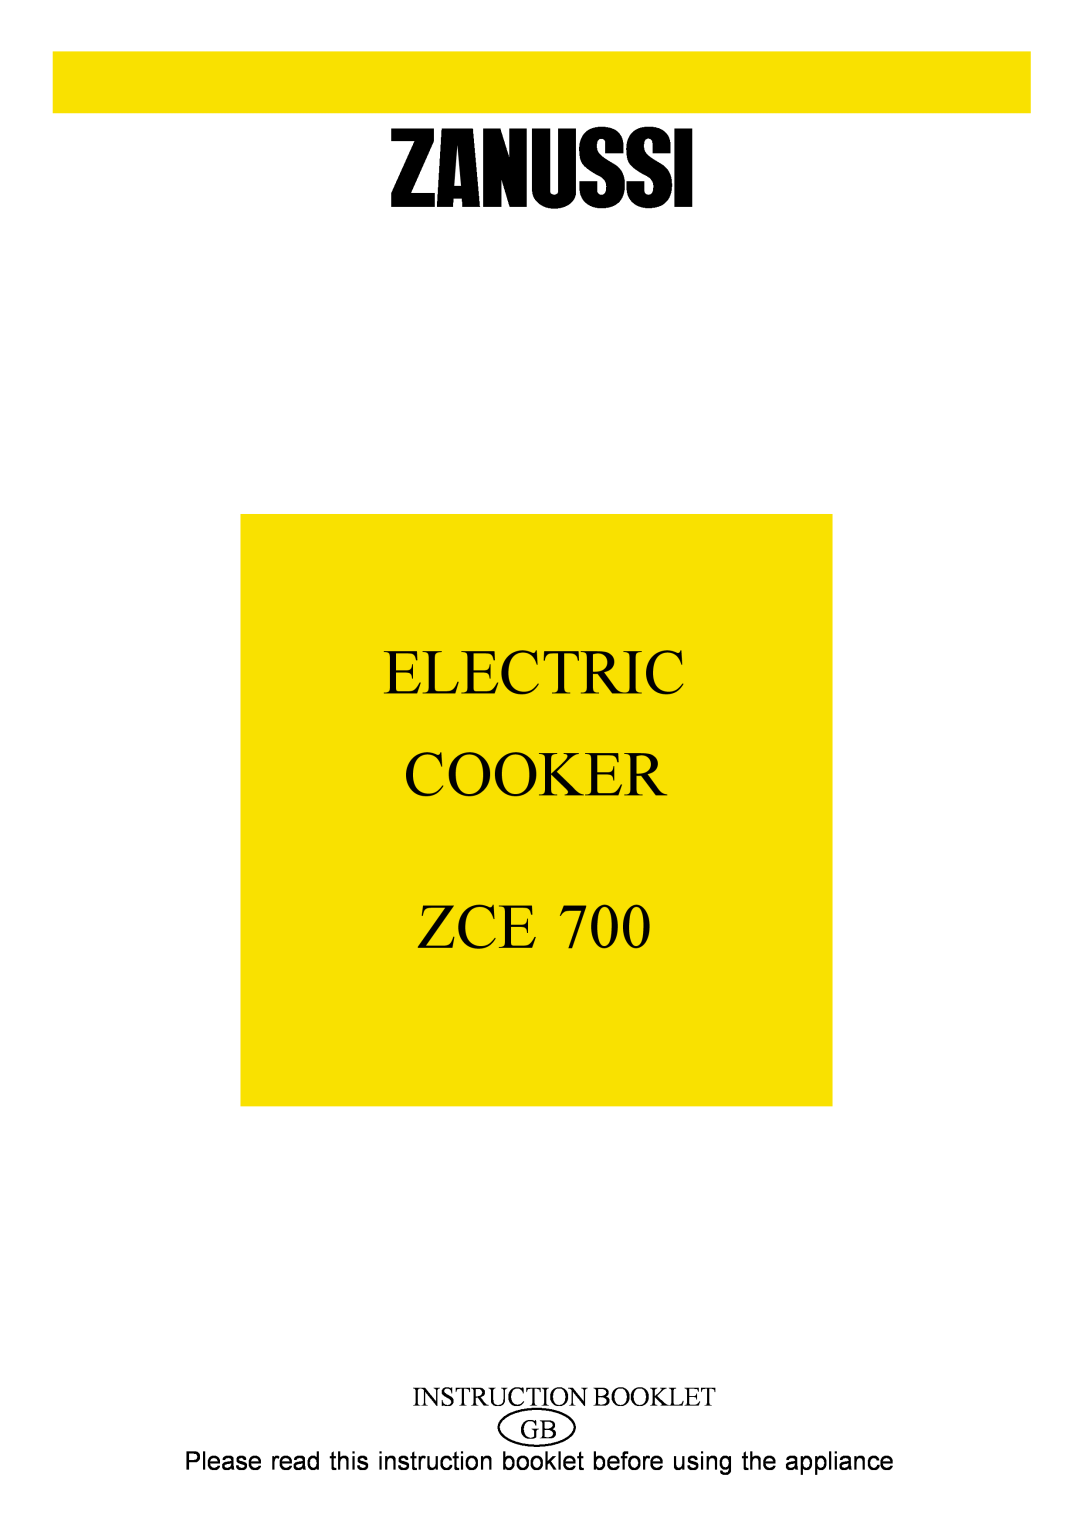 Zanussi ZCE 700 manual Instruction Booklet Gb, Please read this instruction booklet before using the appliance 